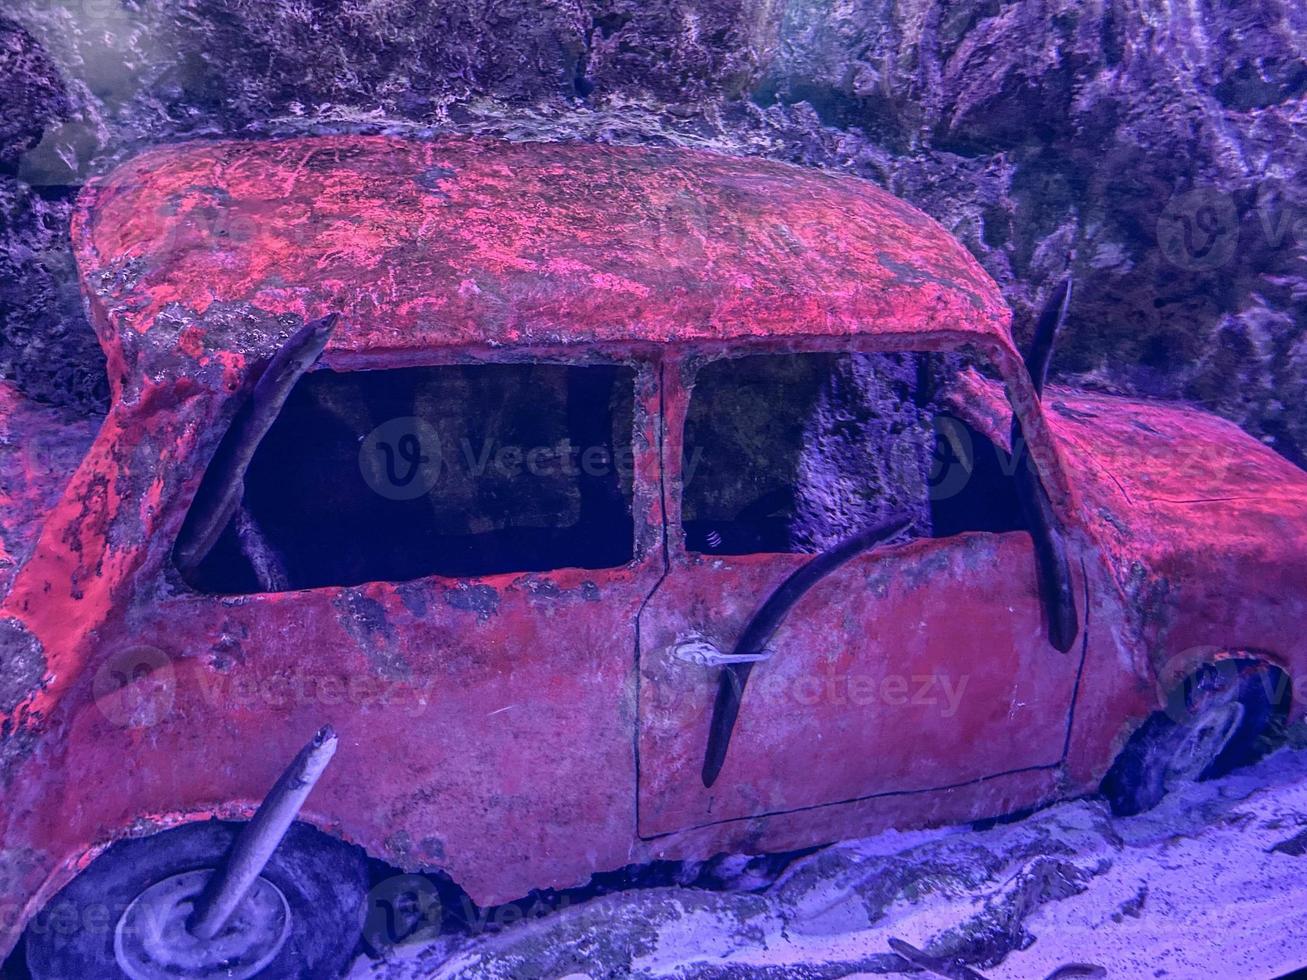 bright, red car sank at the bottom of the sea. roof and wheels with cracked paint. nearby, an eel climbed inside the car and sits on the handles photo